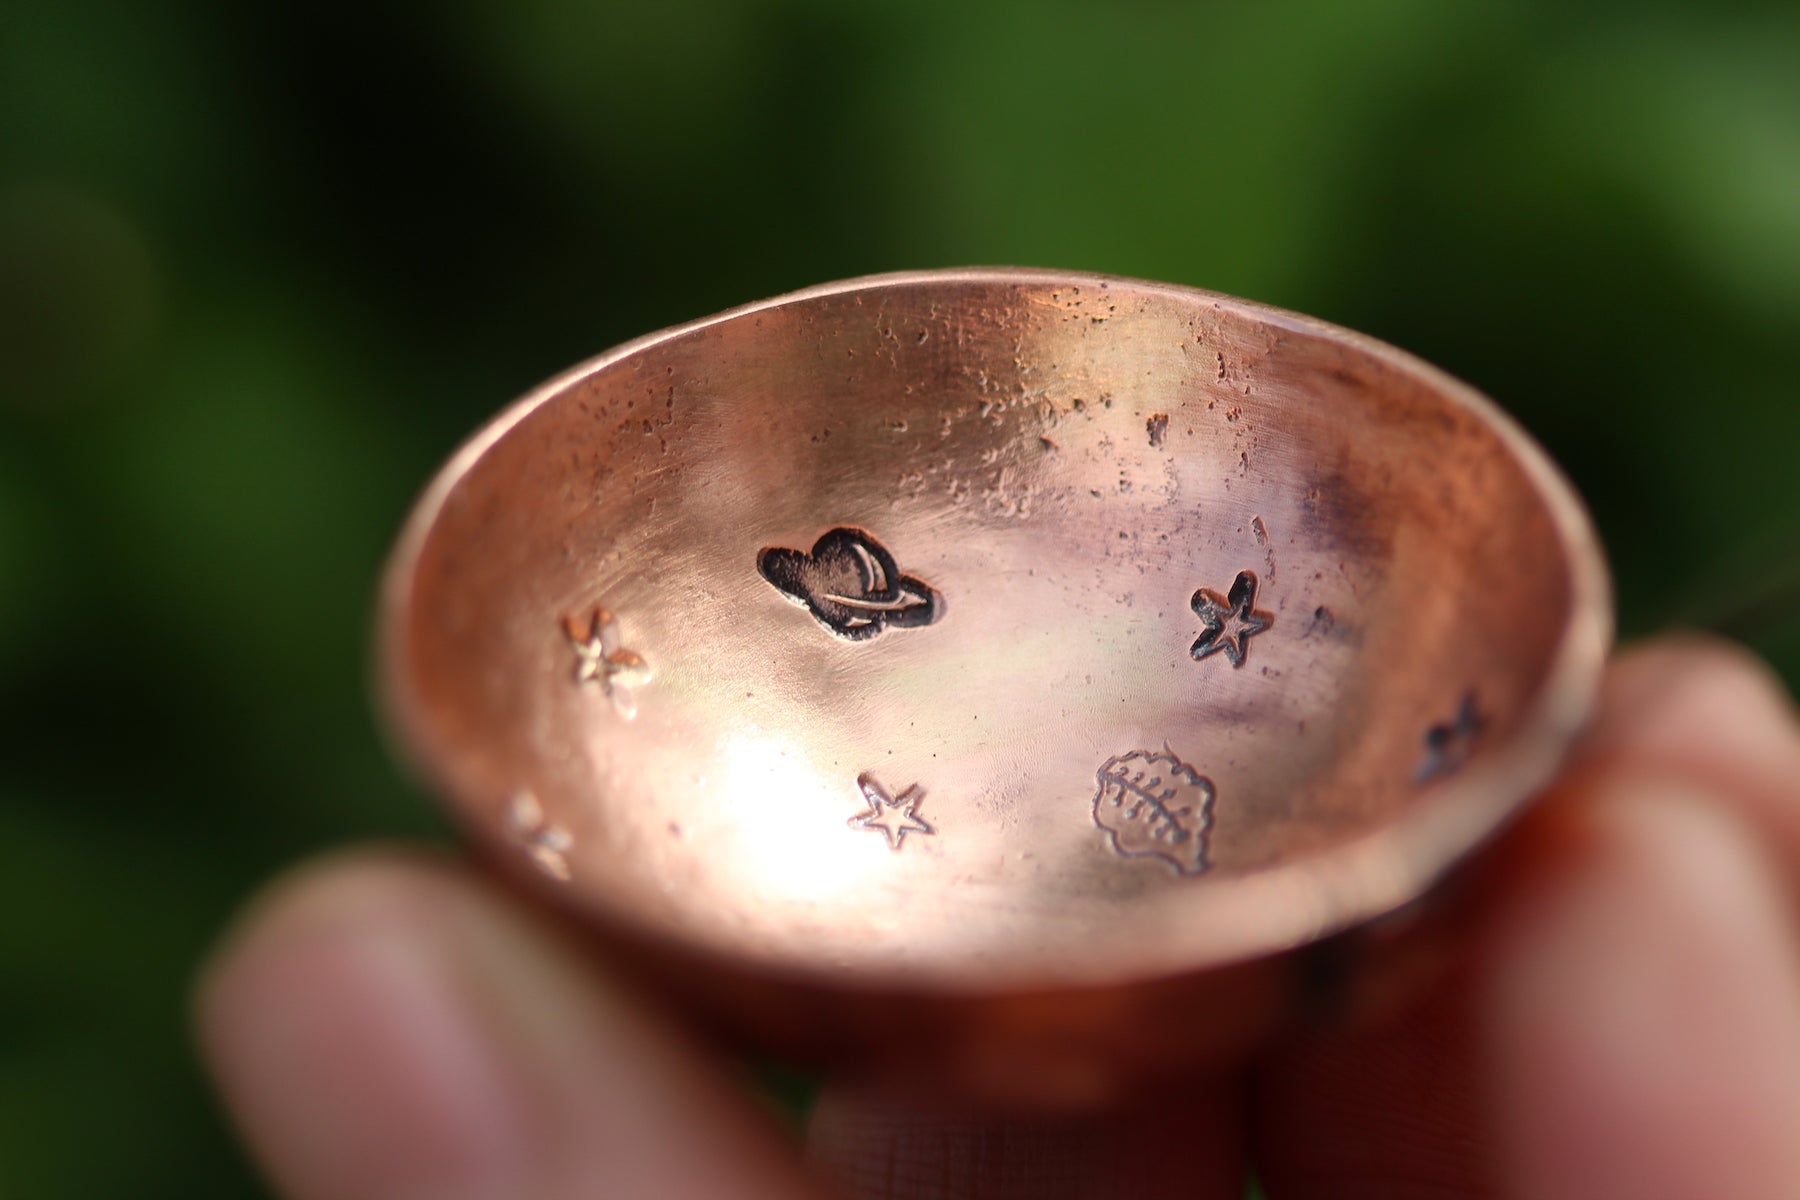 WITCHES SPOON No. 2 - Handmade Copper Spoon